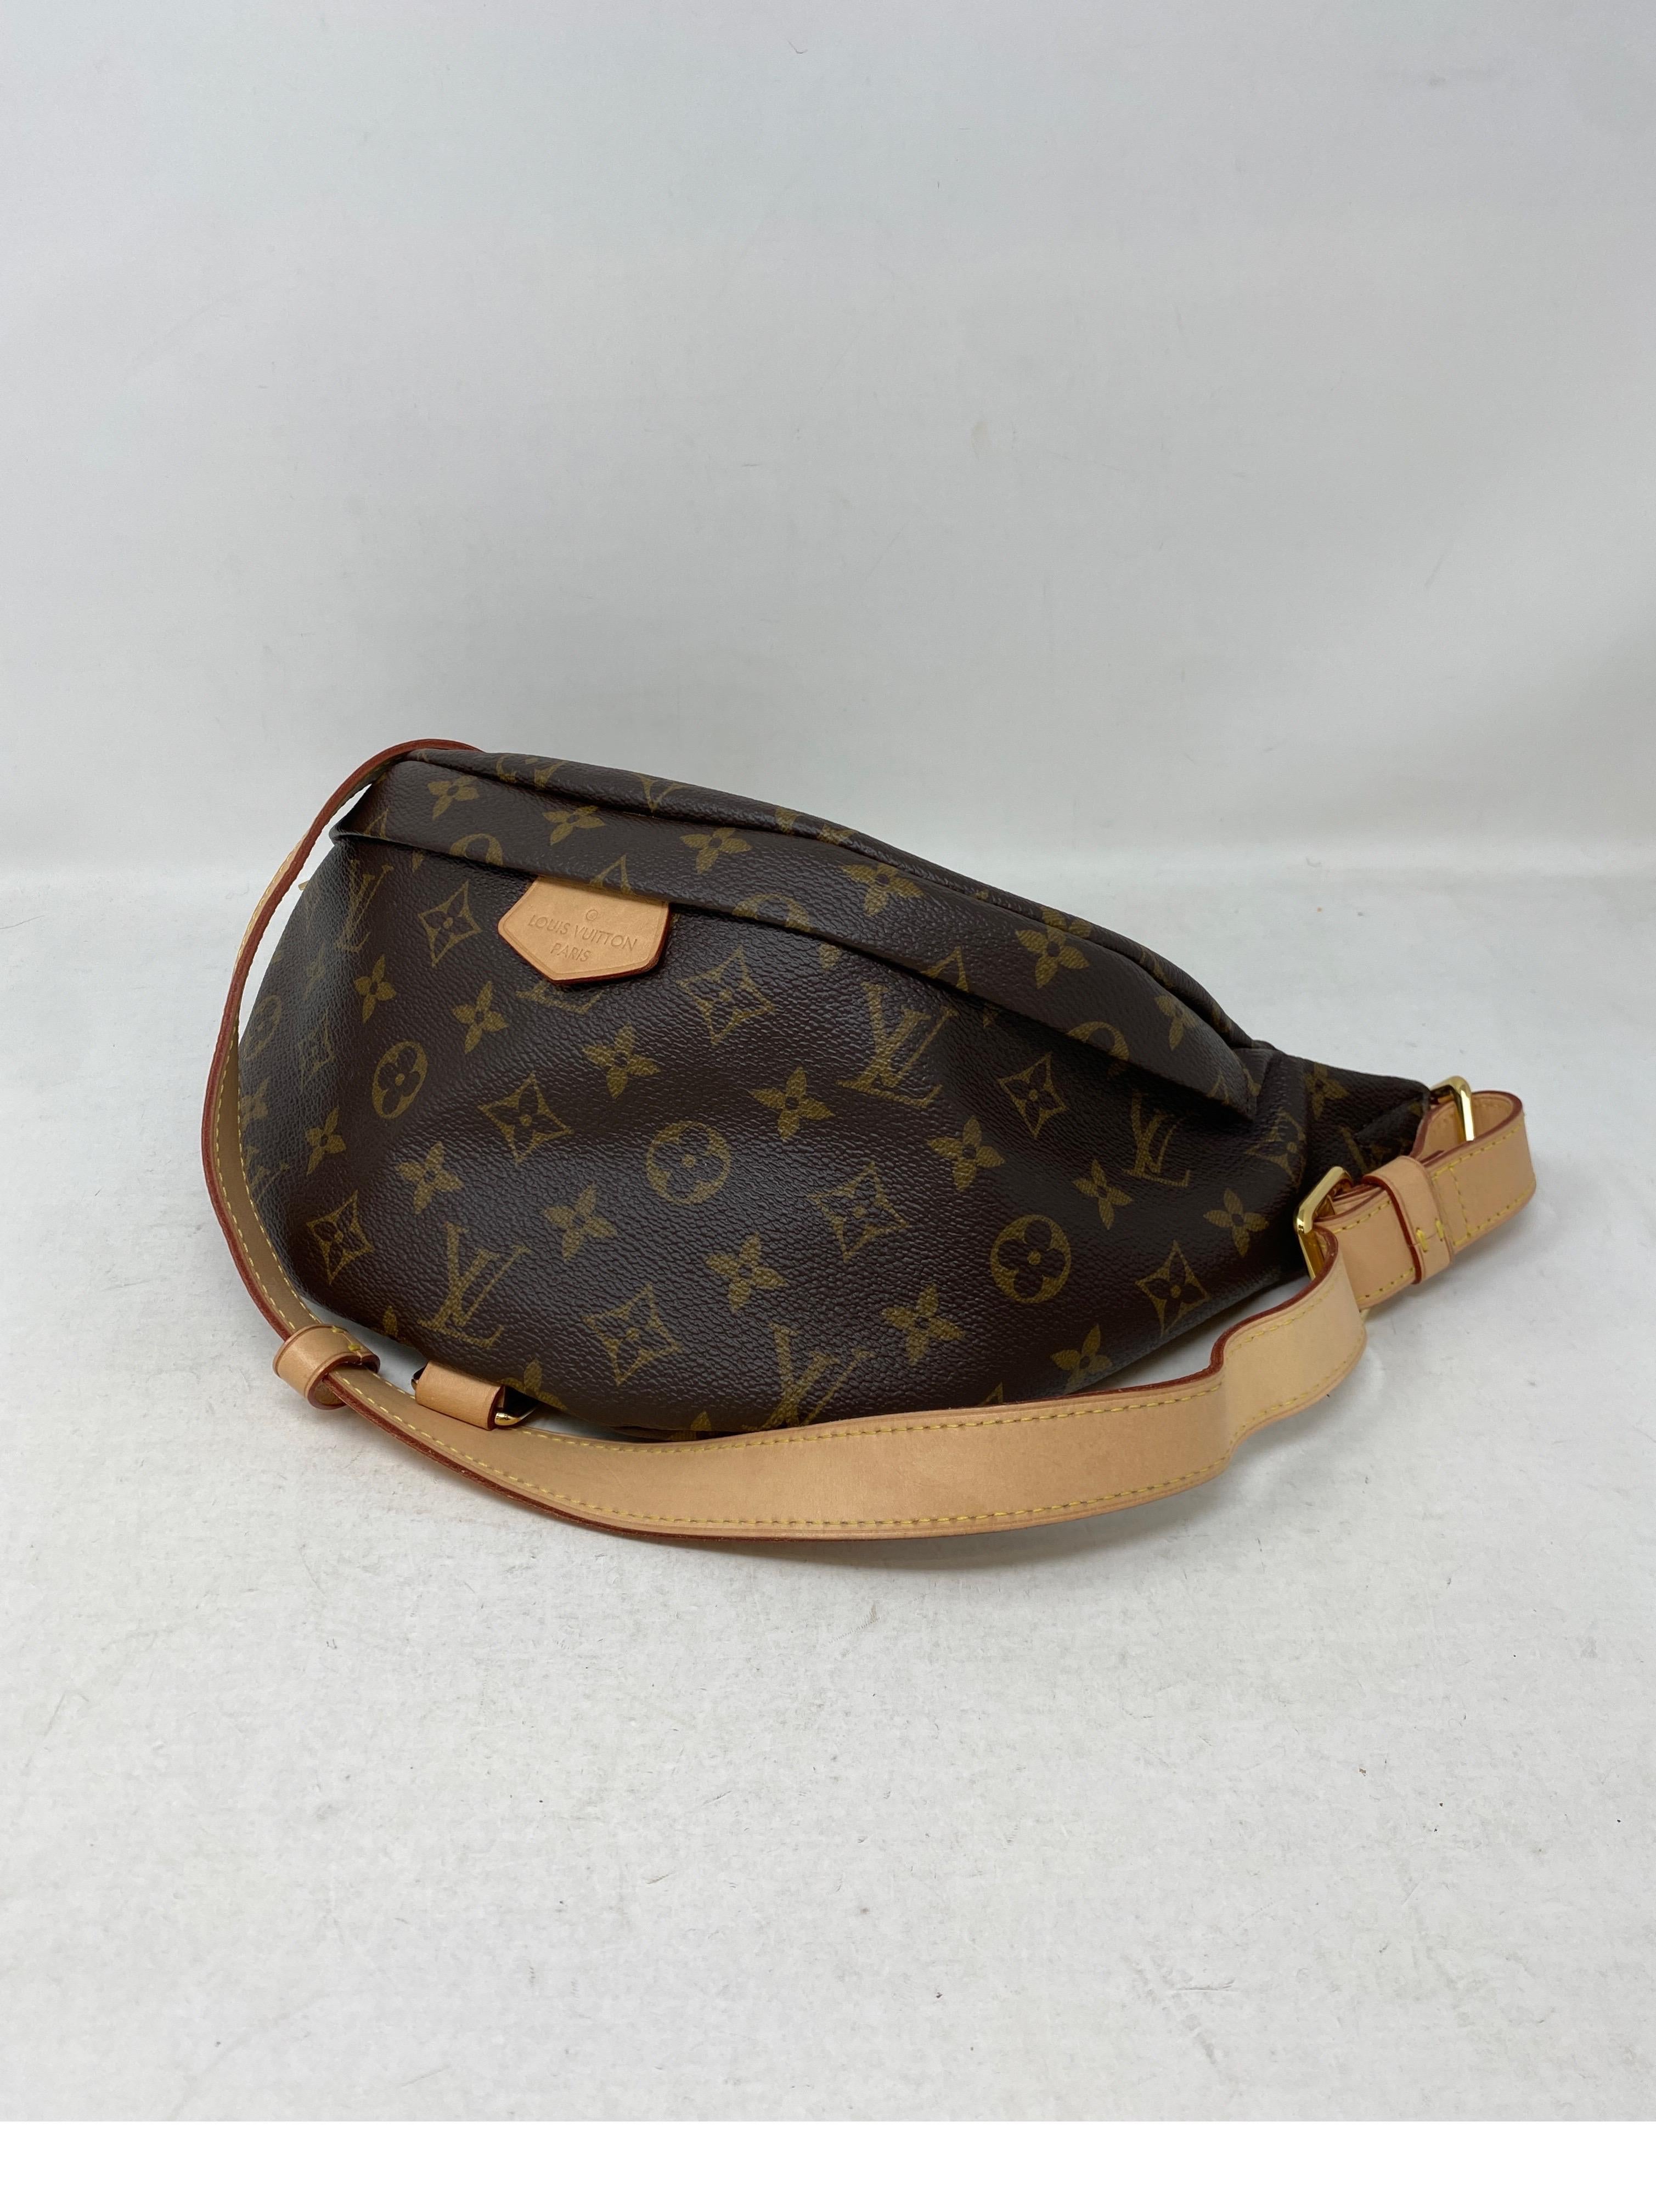 Louis Vuitton Monogram Bum Bag. Retired style from Louis Vuitton. Excellent condition. Interior clean. Hard to find. Includes dust bag. Guaranteed authentic. 